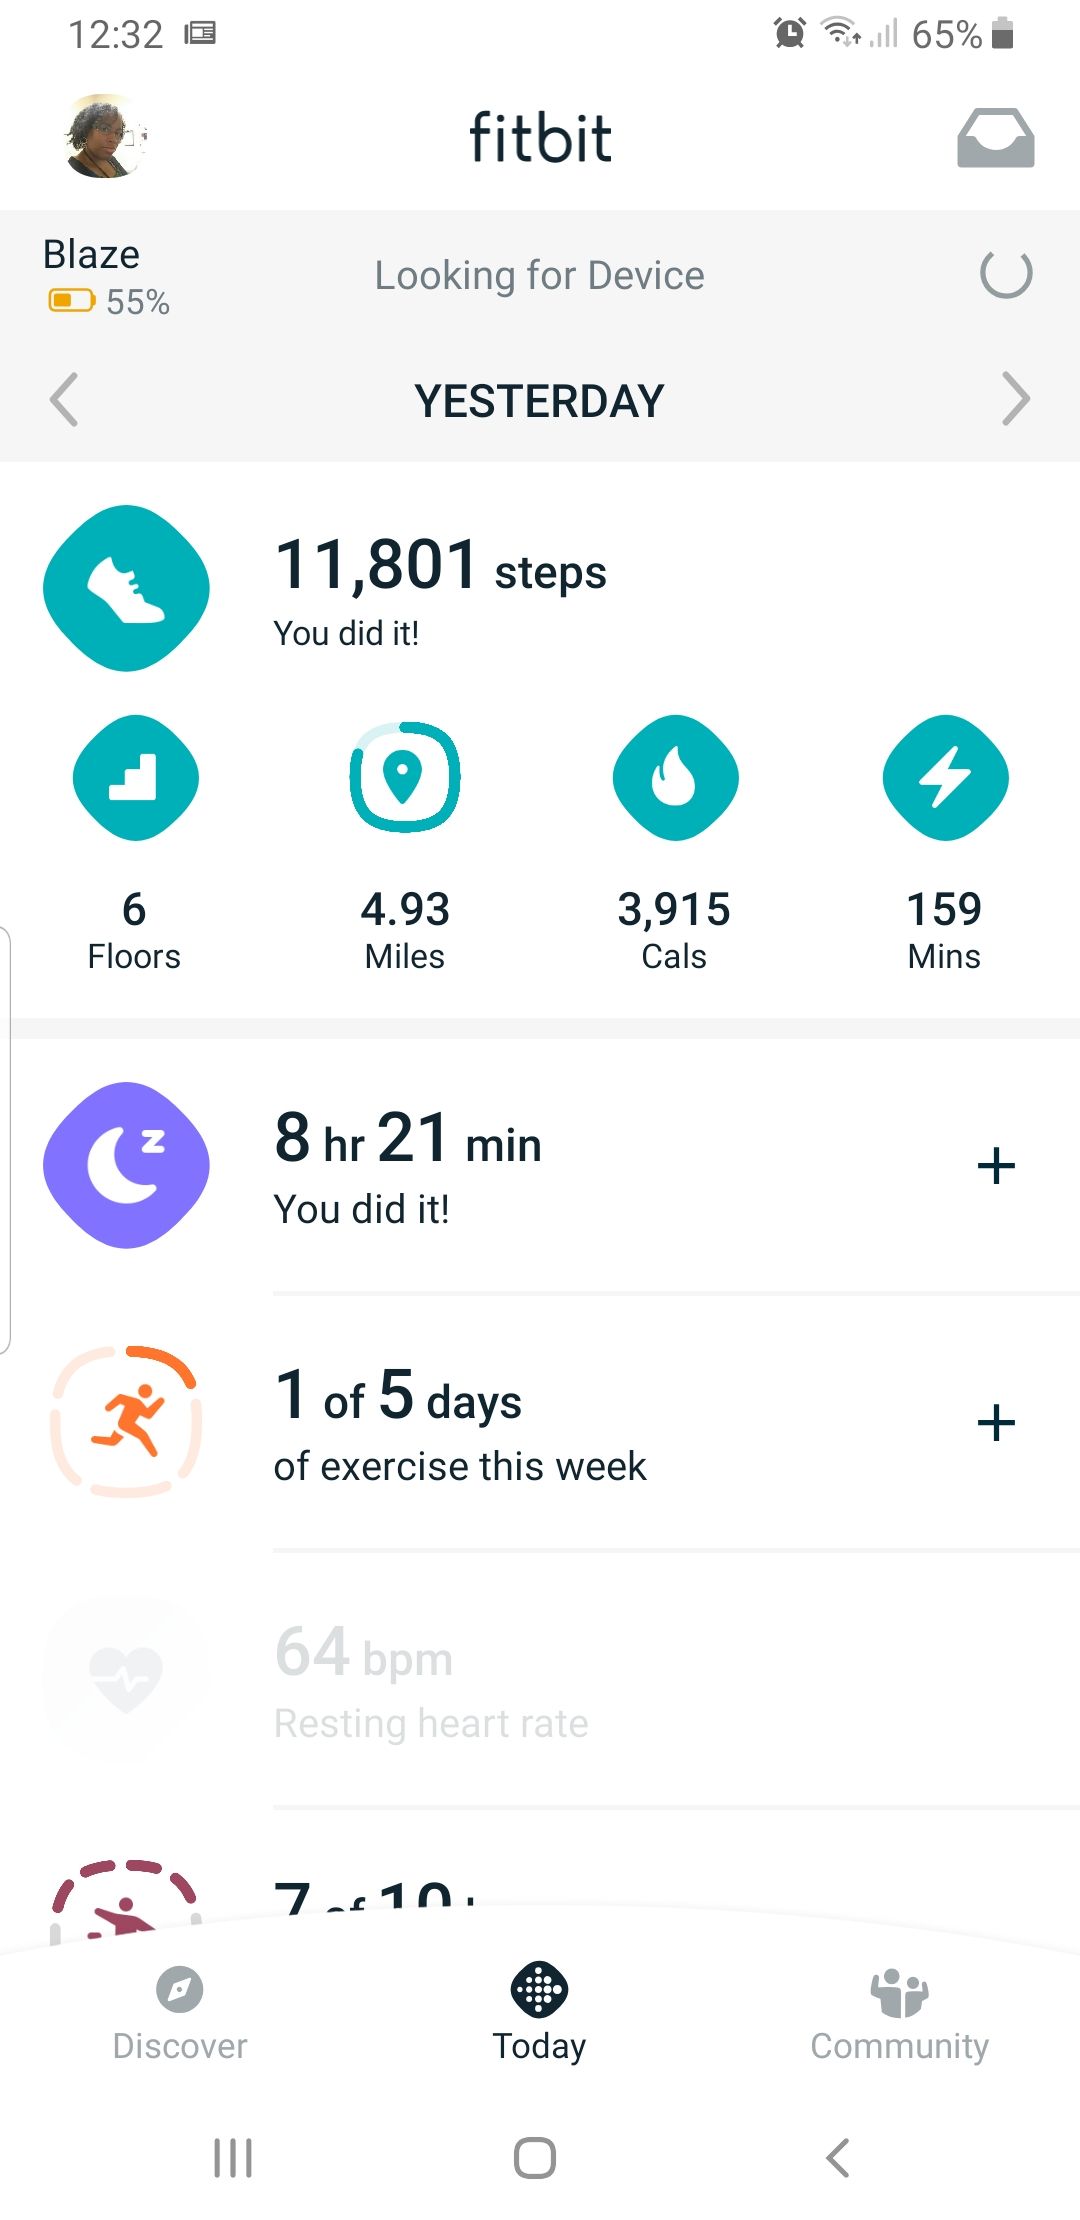 fitbit app without fitbit